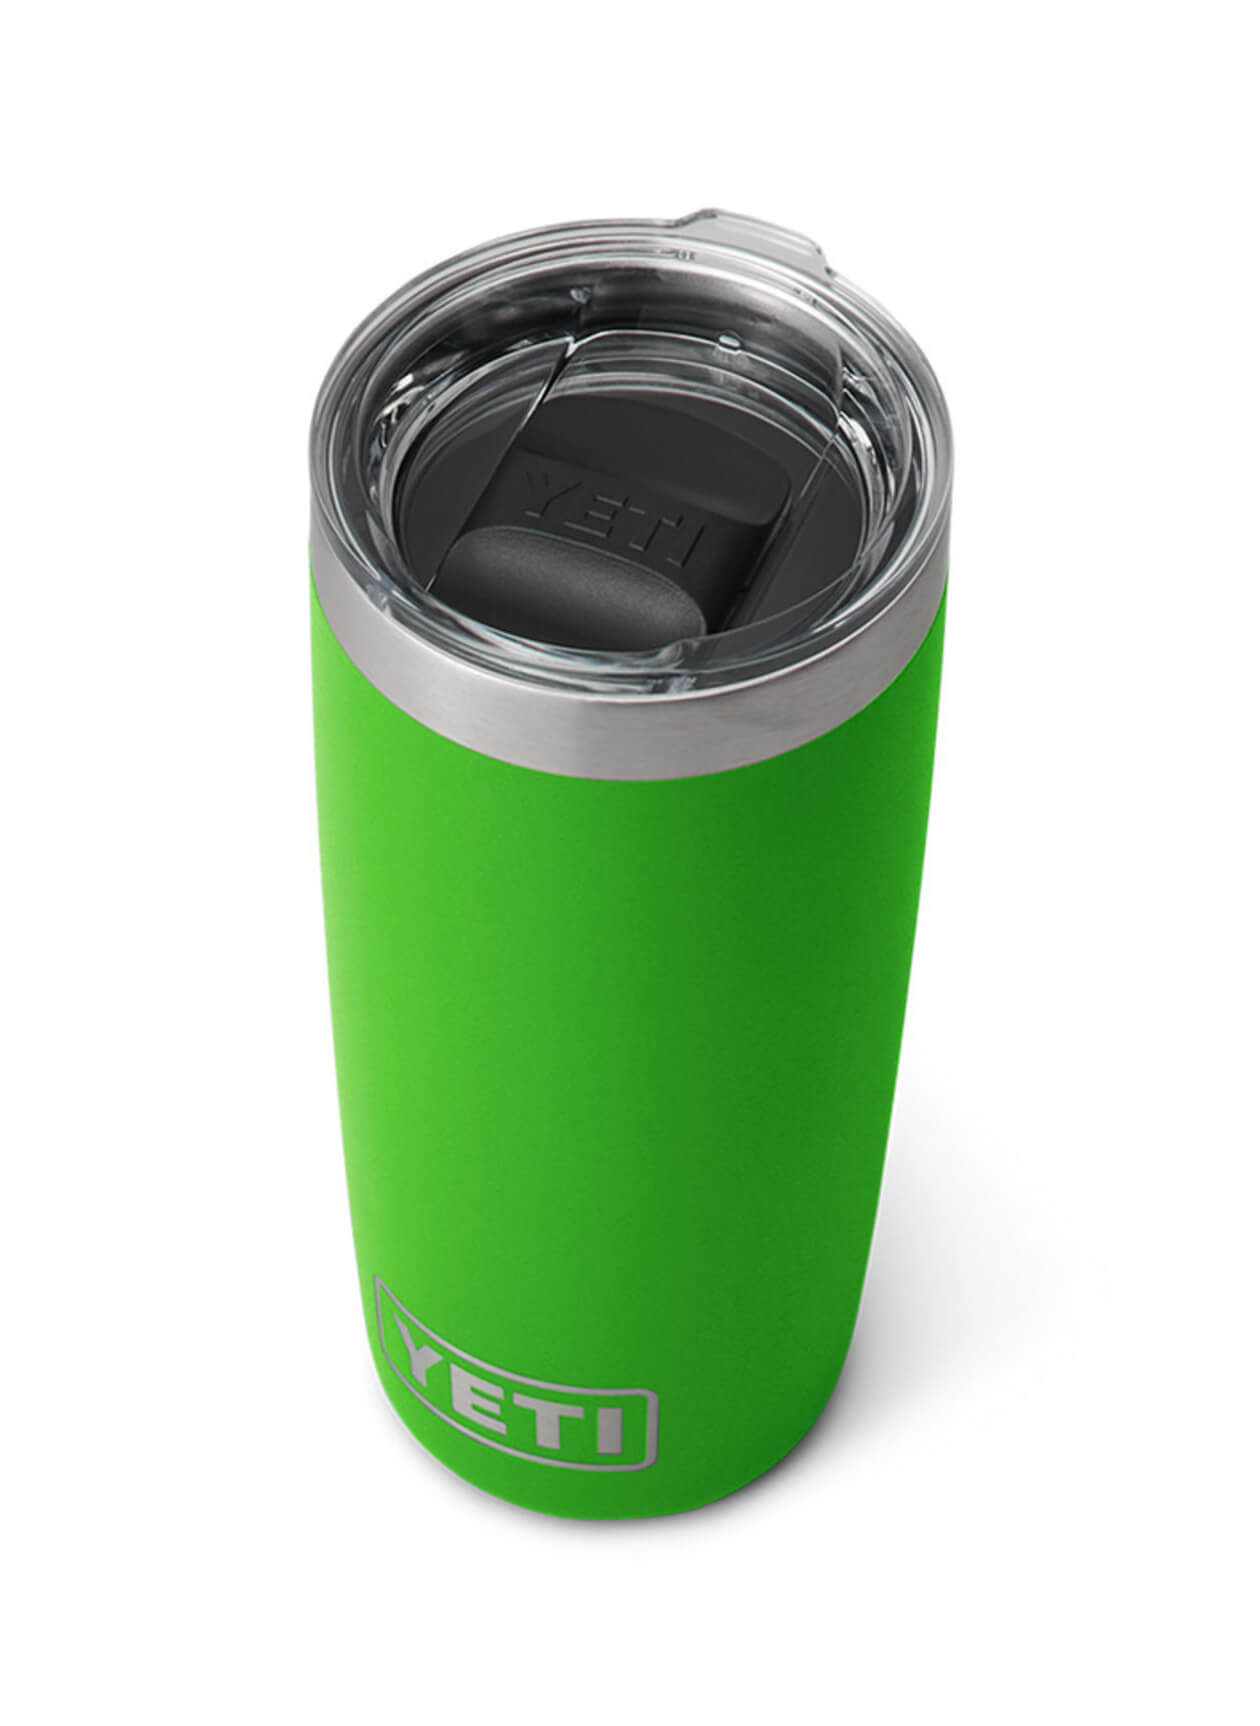 YETI Rambler 10 oz Tumbler, Stainless Steel, Vacuum Insulated with  MagSlider Lid, Canopy Green